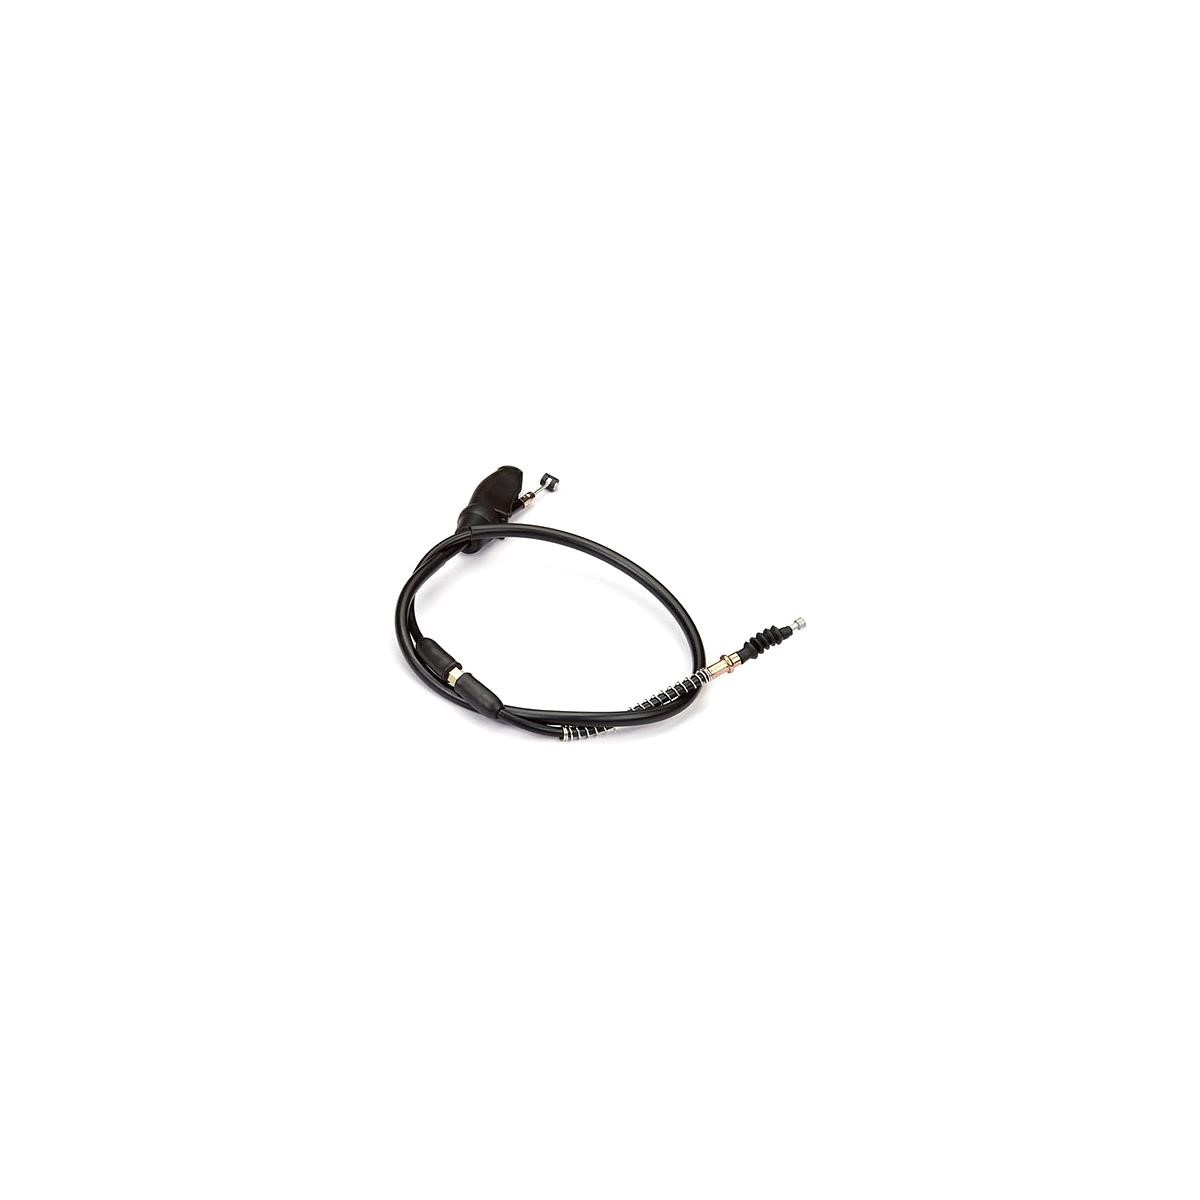 YCF Clutch Cable  Black